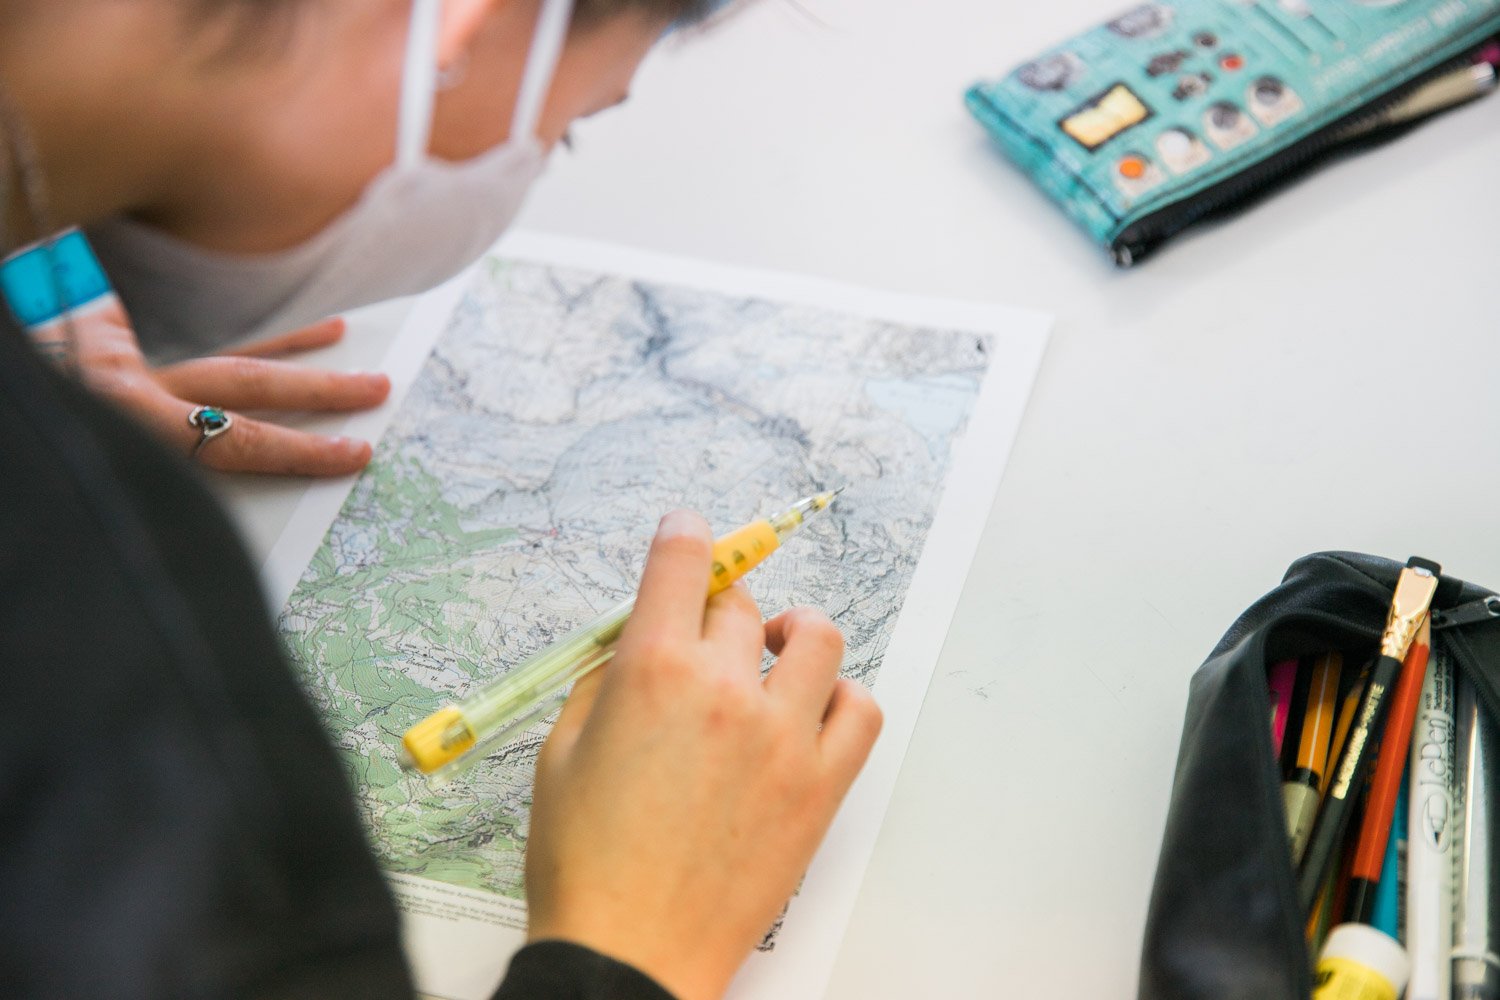 A student examines a topographical map and traces water runoff